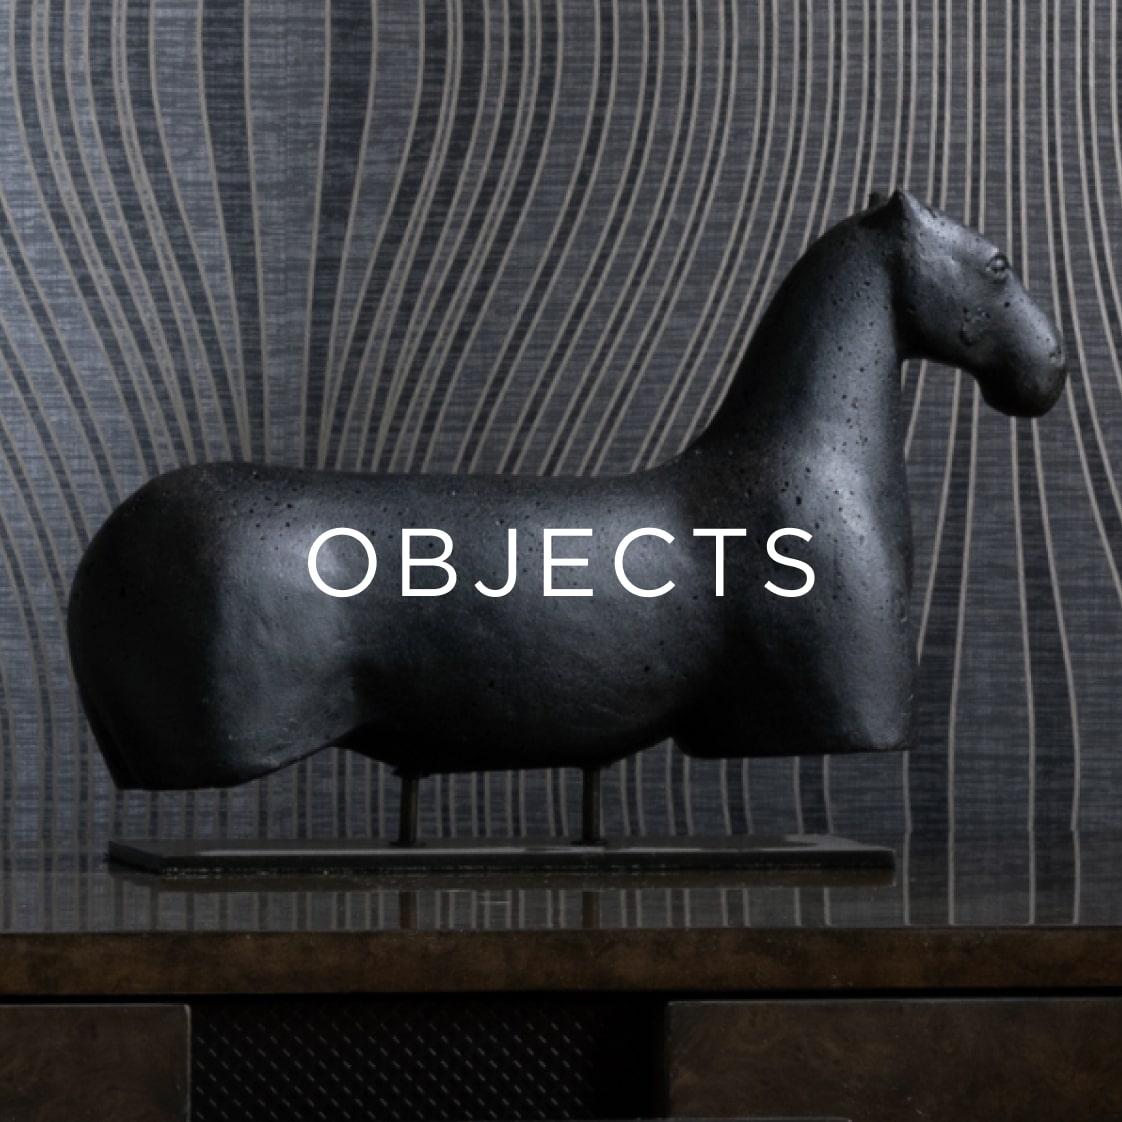 Arteriors objects sculptures and bookends